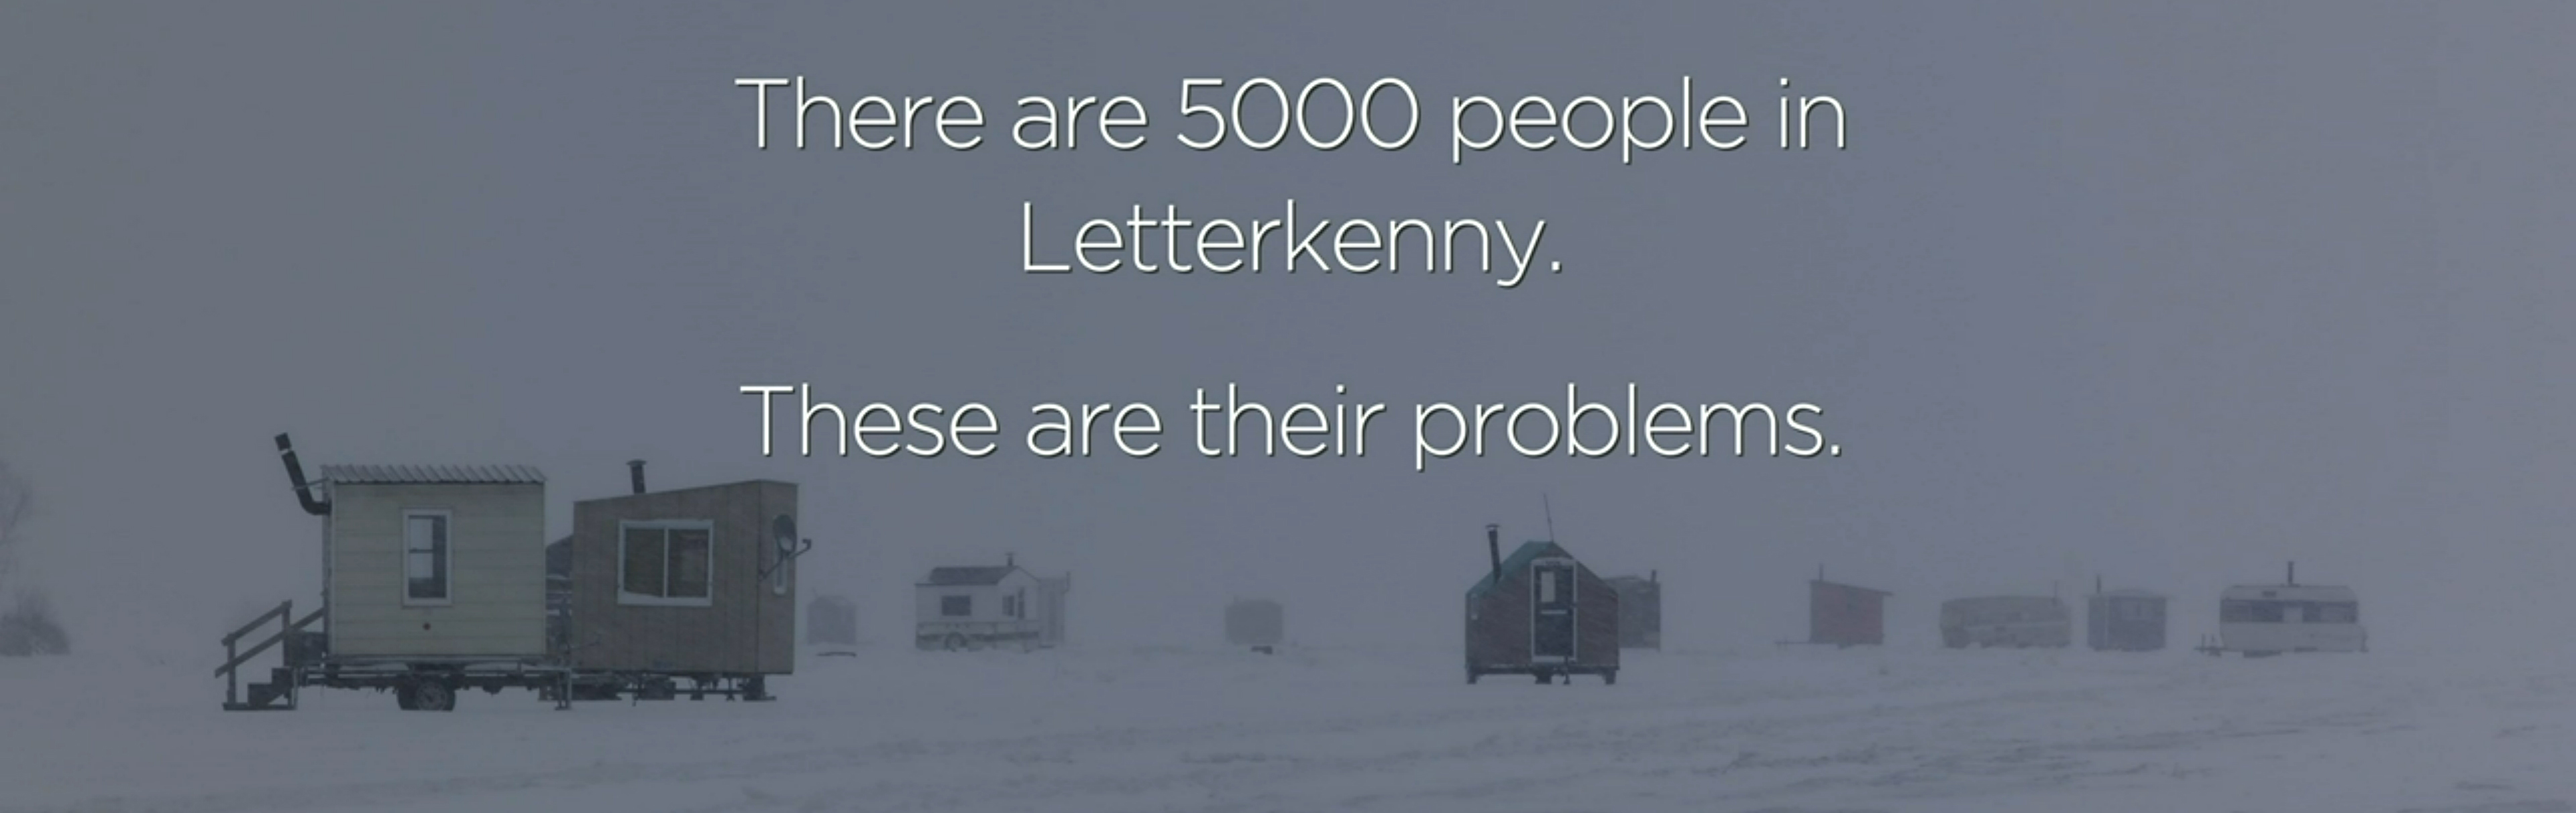 There are 5000 people in Letterkenny. These are their problems.